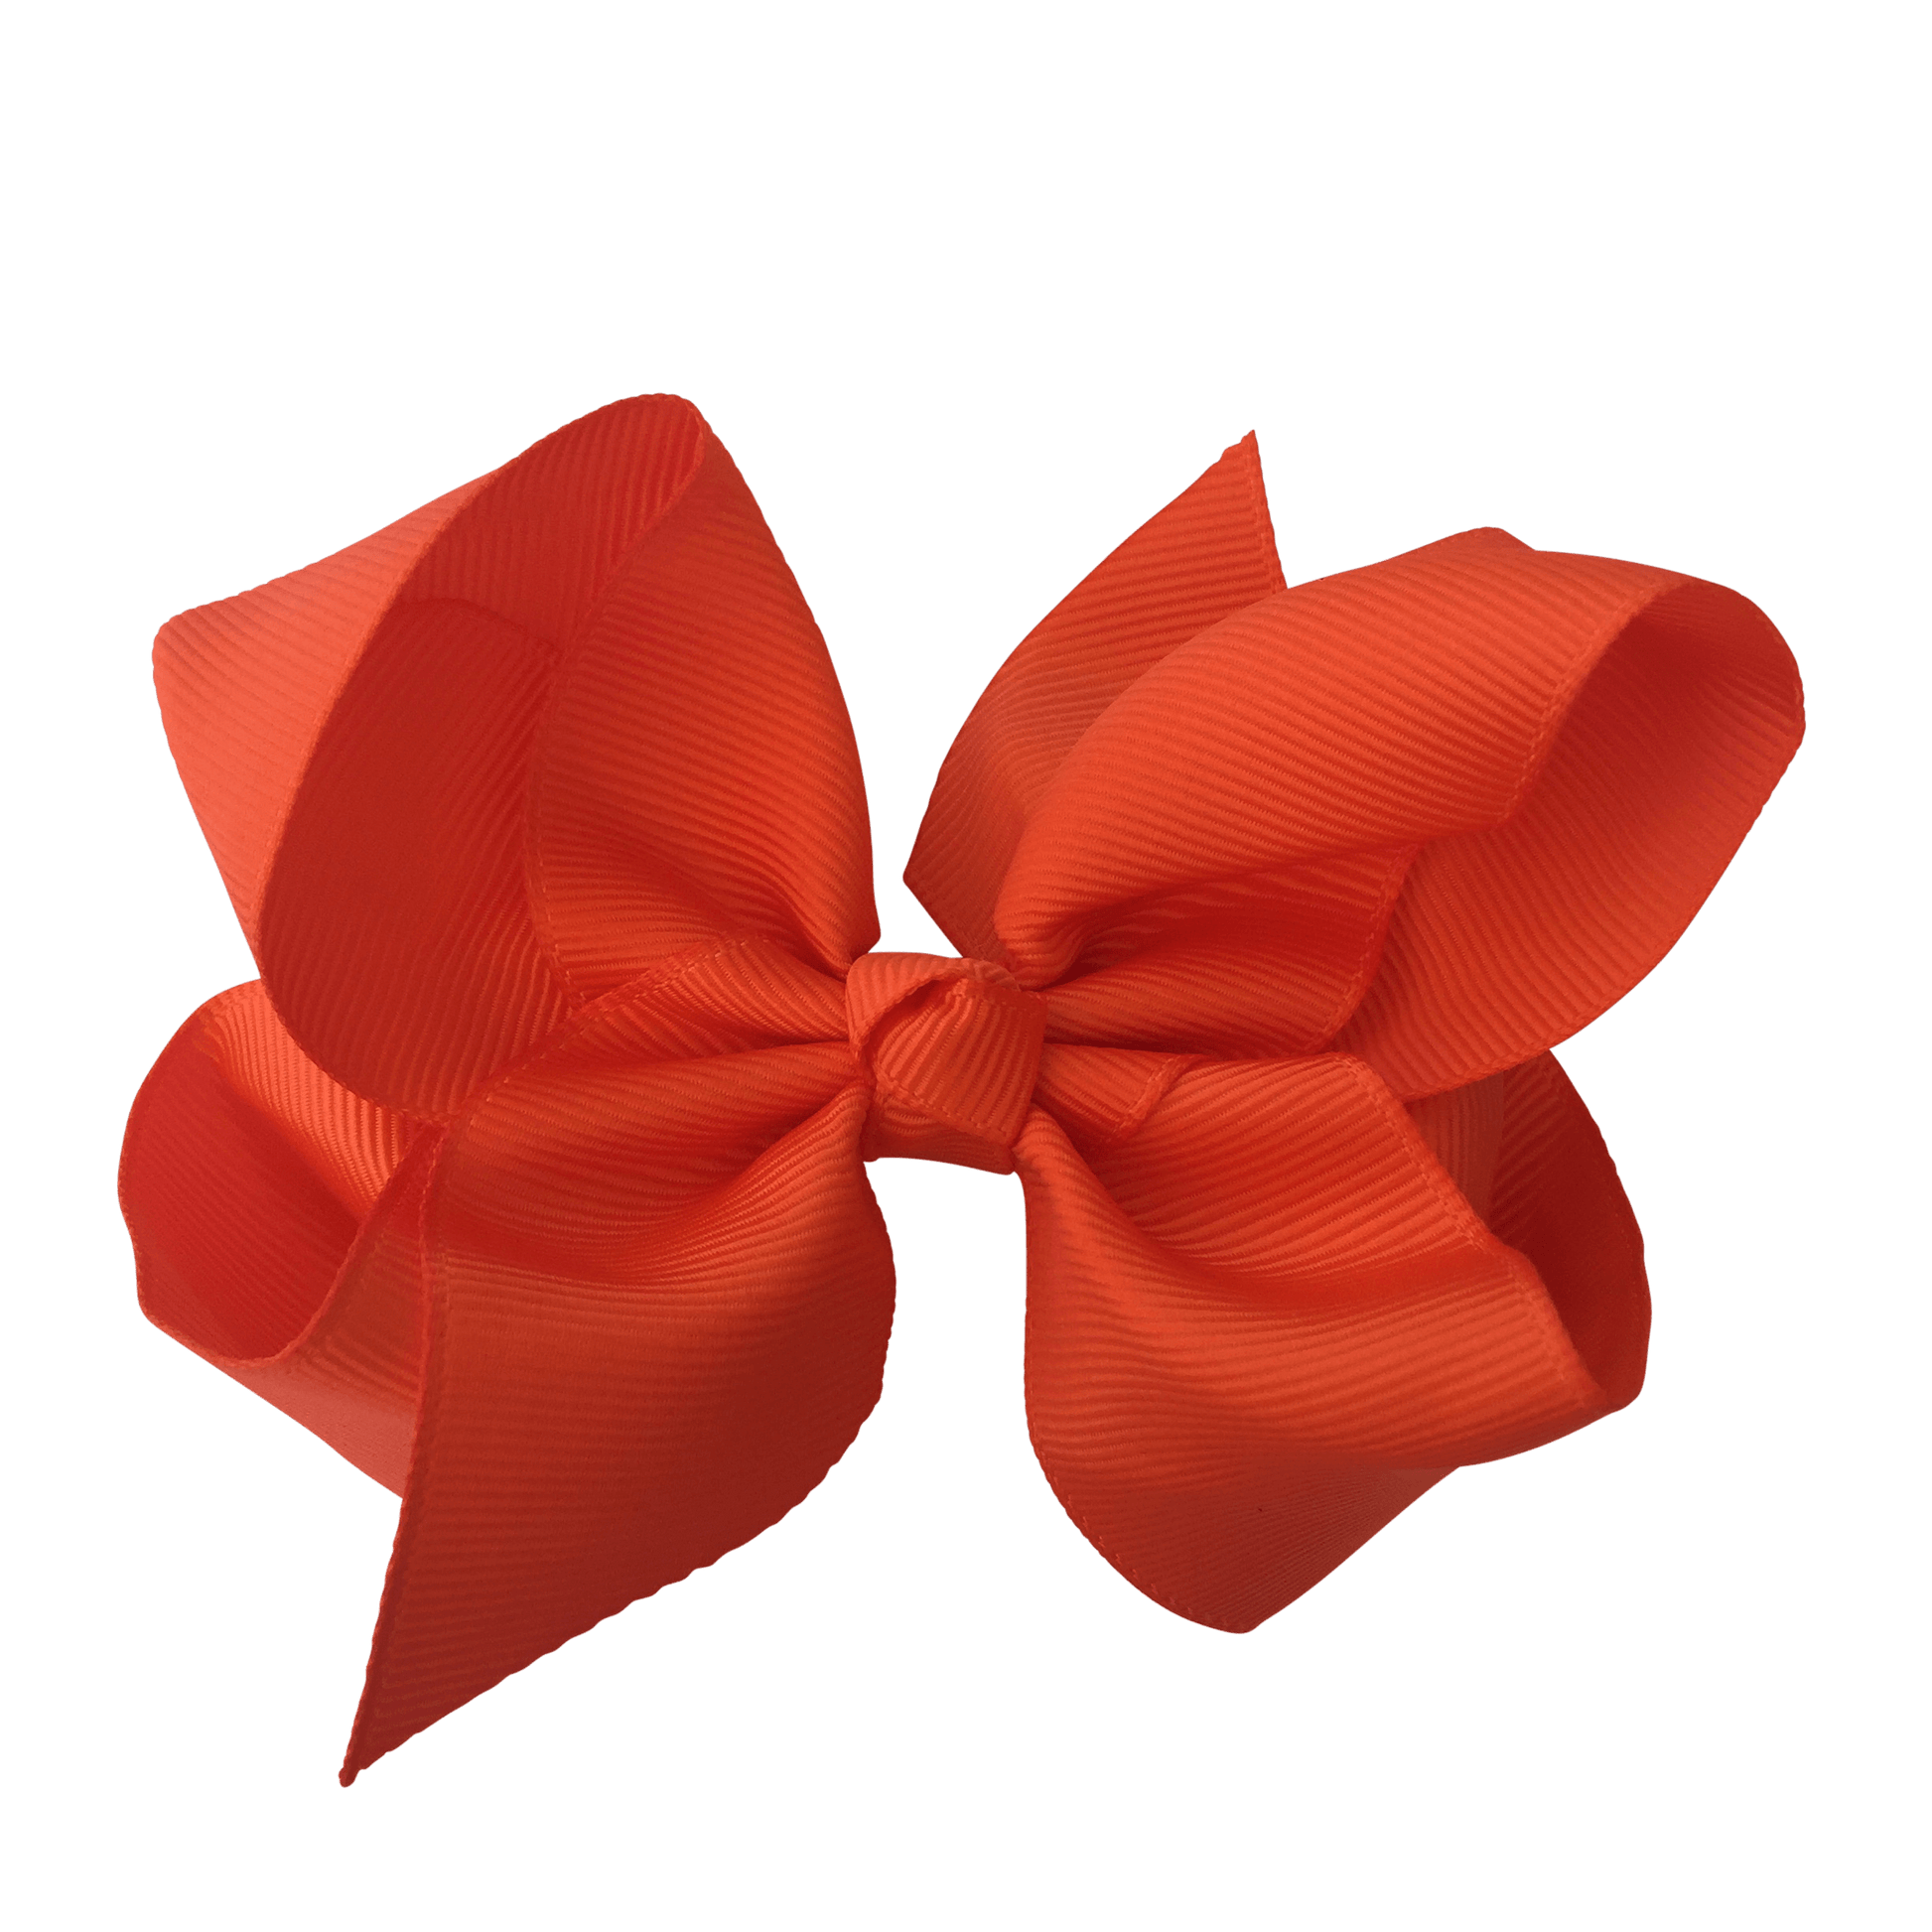 Initial / Letter Big Bow - Hair clips - School Uniform Hair Accessories - Ponytails and Fairytales